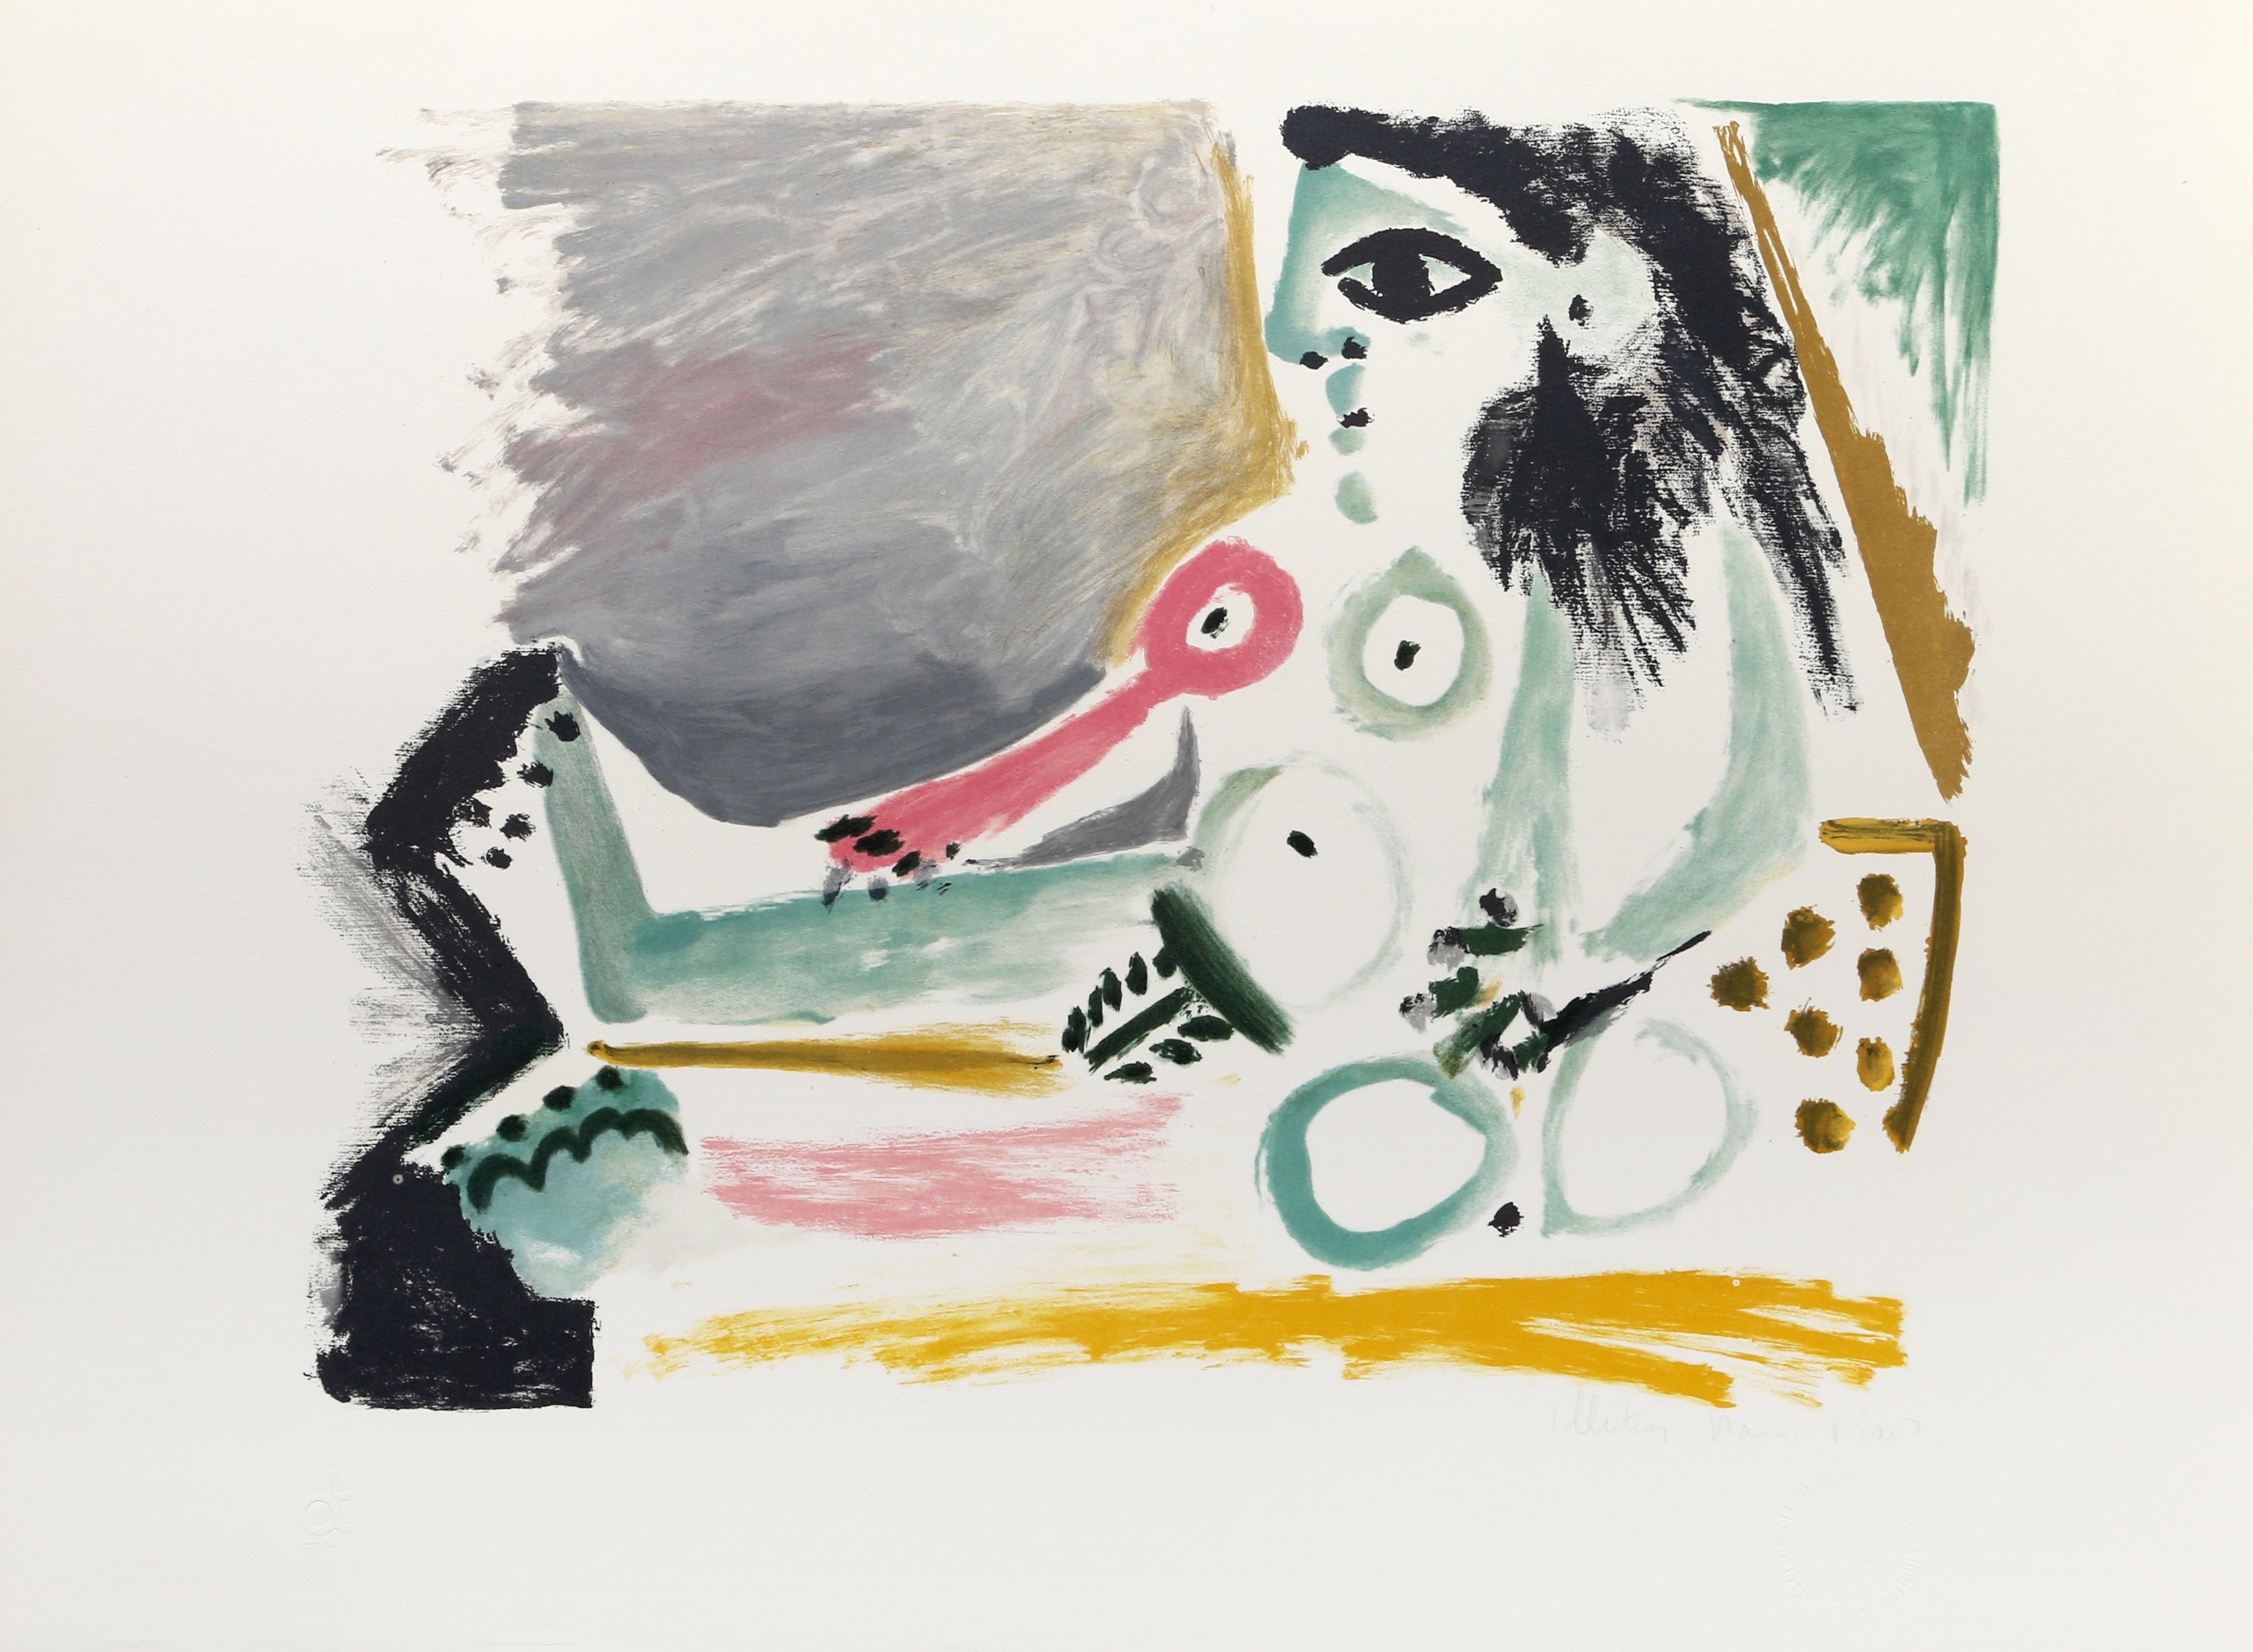 Abstract Print Pablo Picasso - Femme nue en assise